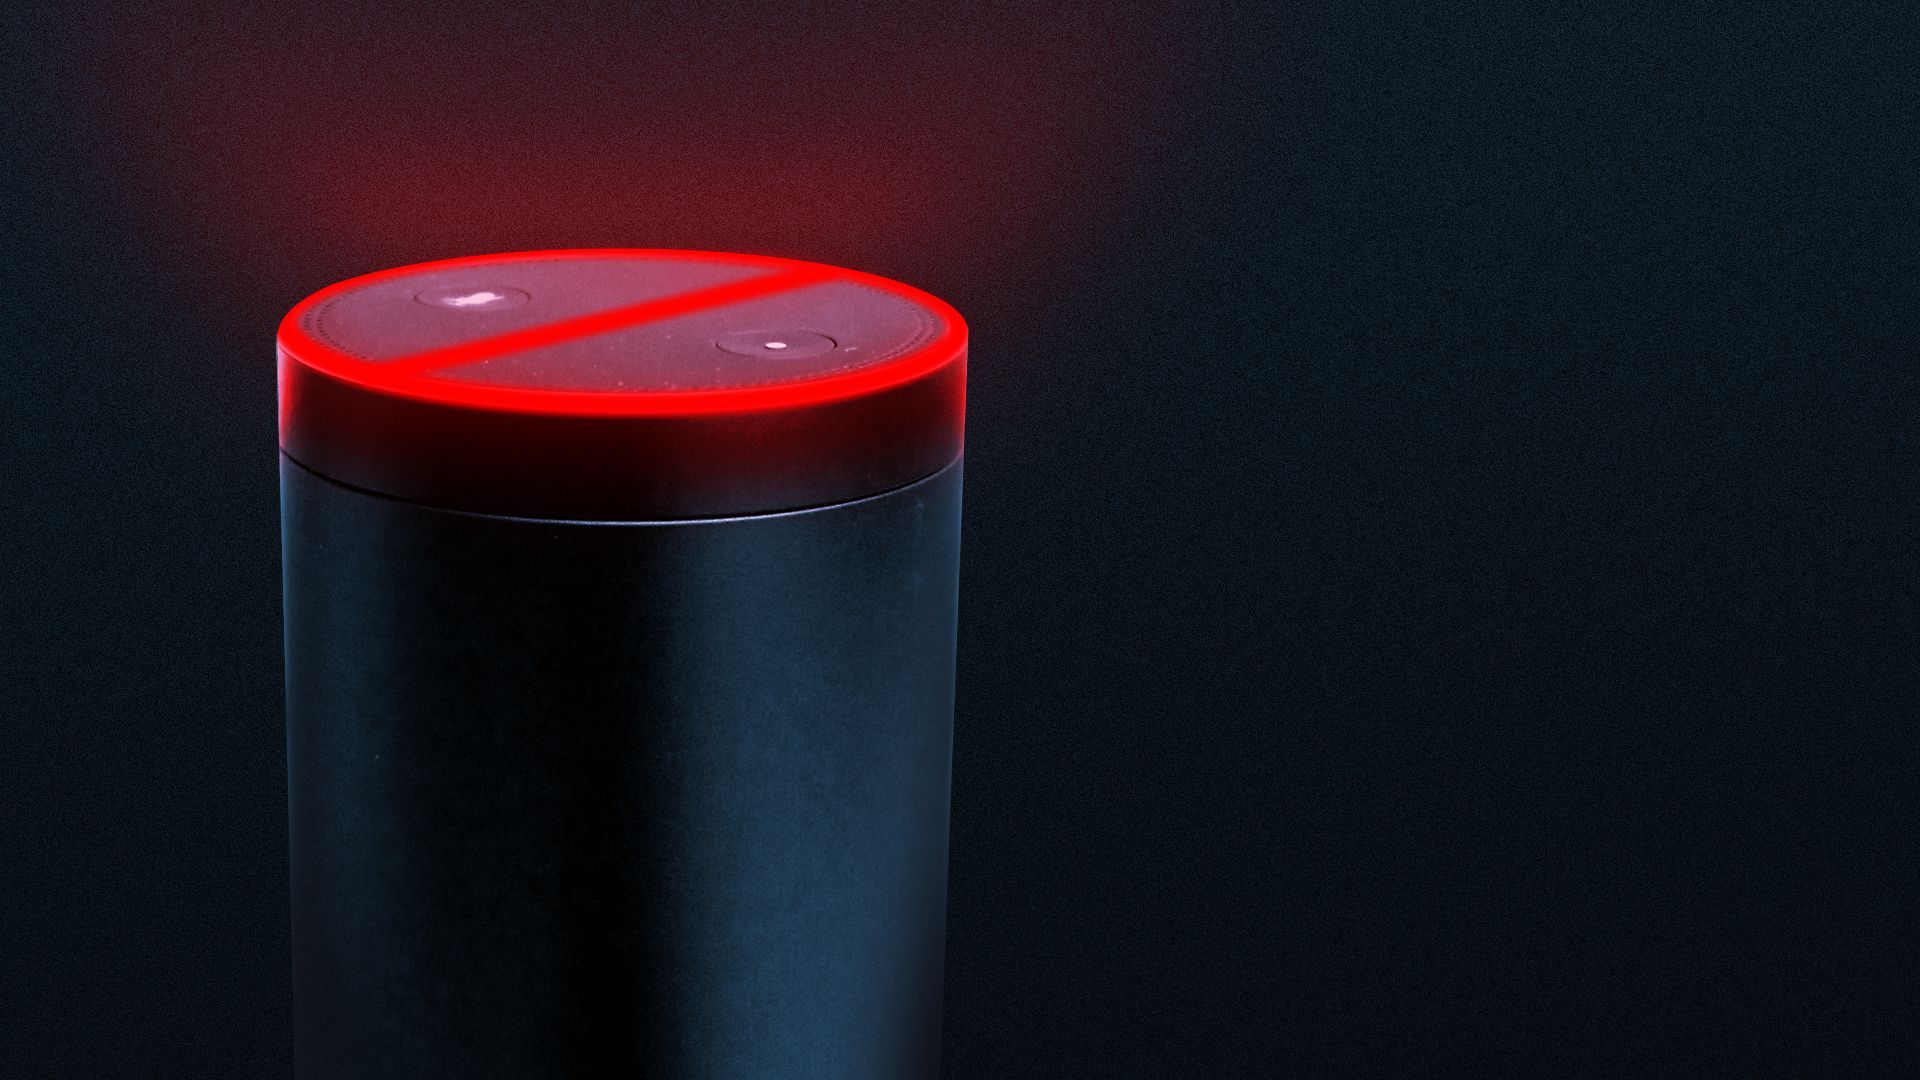 Illustration of an Amazon Echo with a red "no" symbol around the top